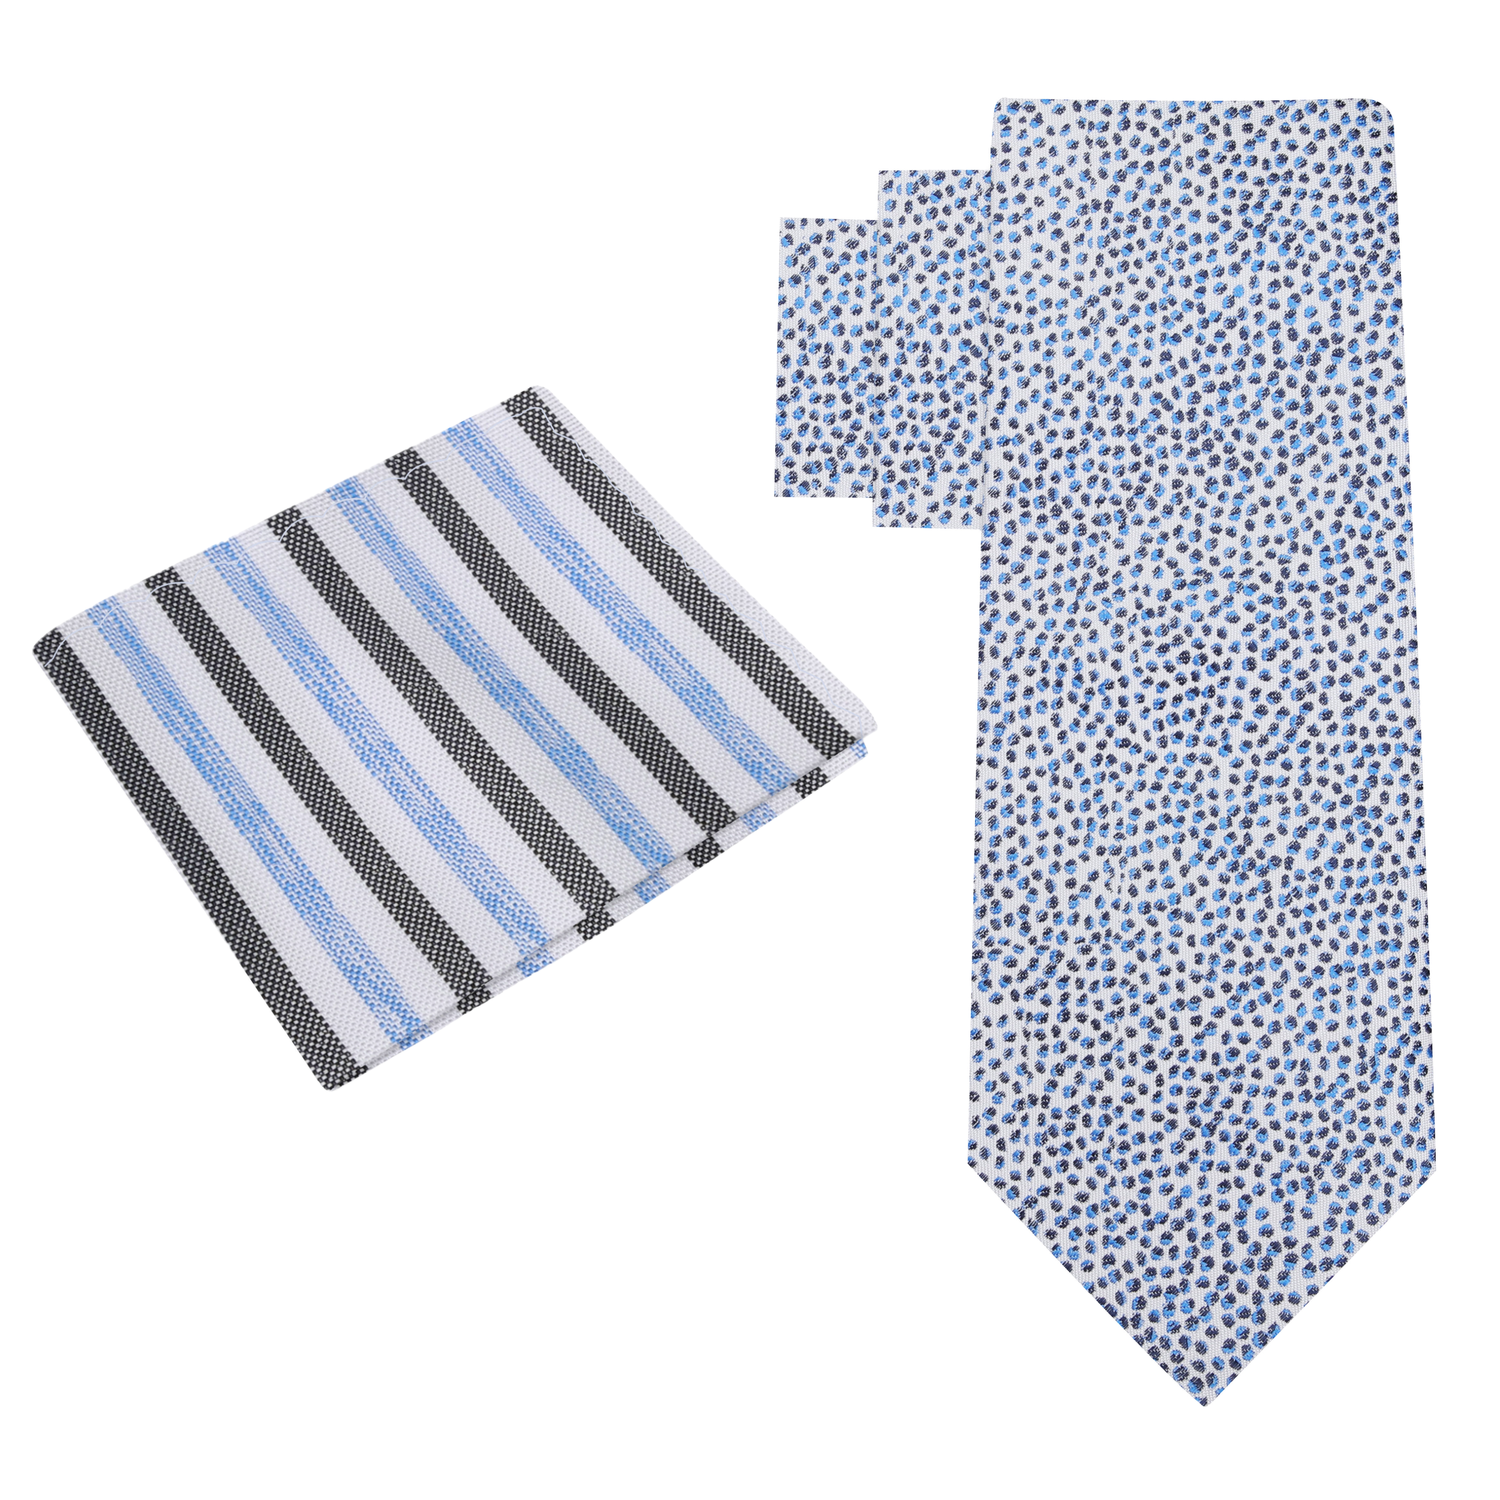 Alt View: Off-white with Black and Blue Pebbles with White Black and Blue Stripe Square